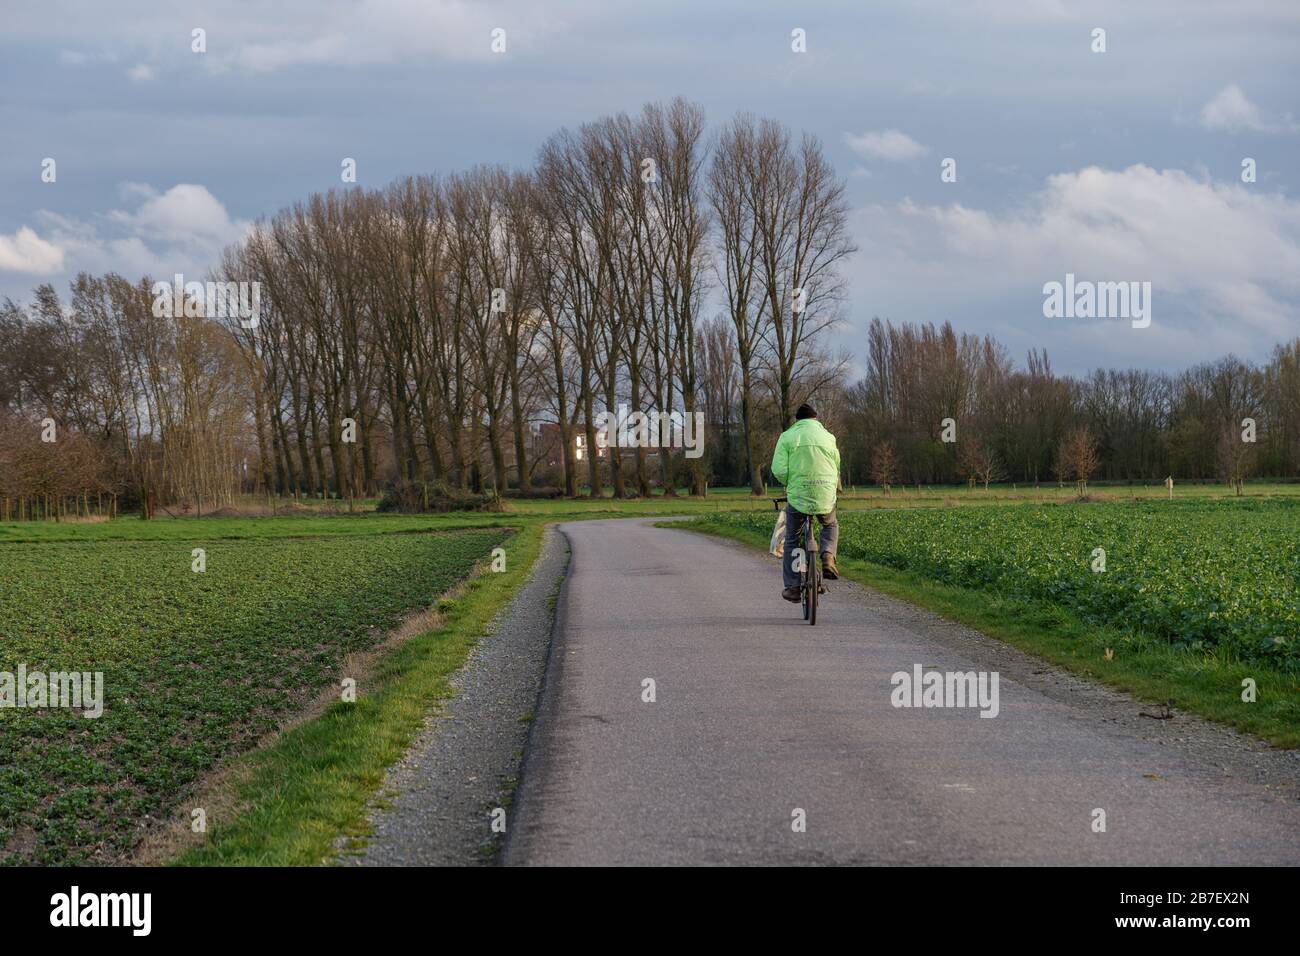 Outdoor sunny view of cyclist ride a bicycle on small road in suburb area surrounded with green agricultural field against cloudy blue sky in Germany. Stock Photo